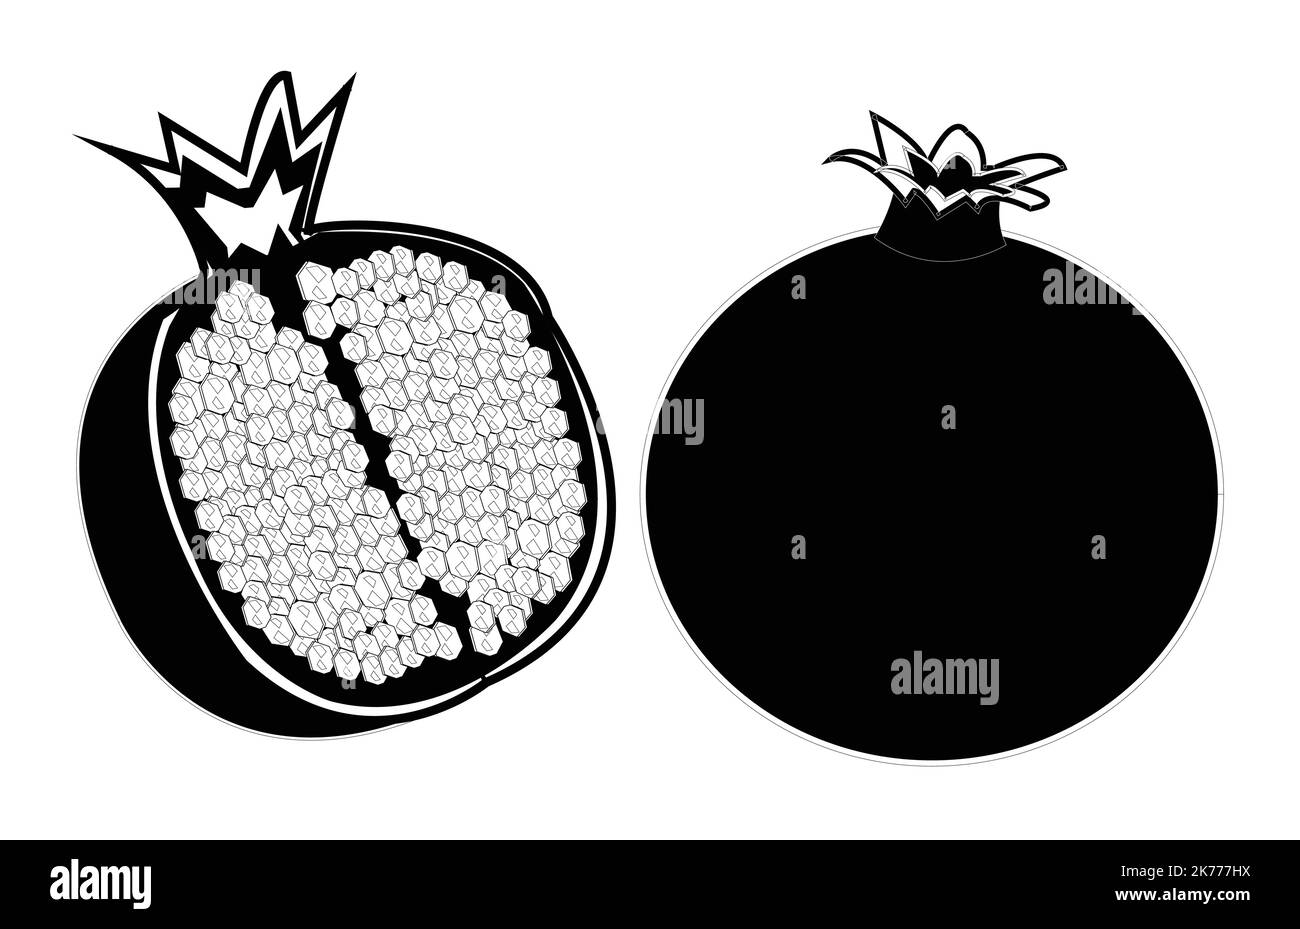 Black and white Pomegranate vector art design.Best graphic resources illustration. vector graphic design for icons and symbols and logo designing Stock Vector